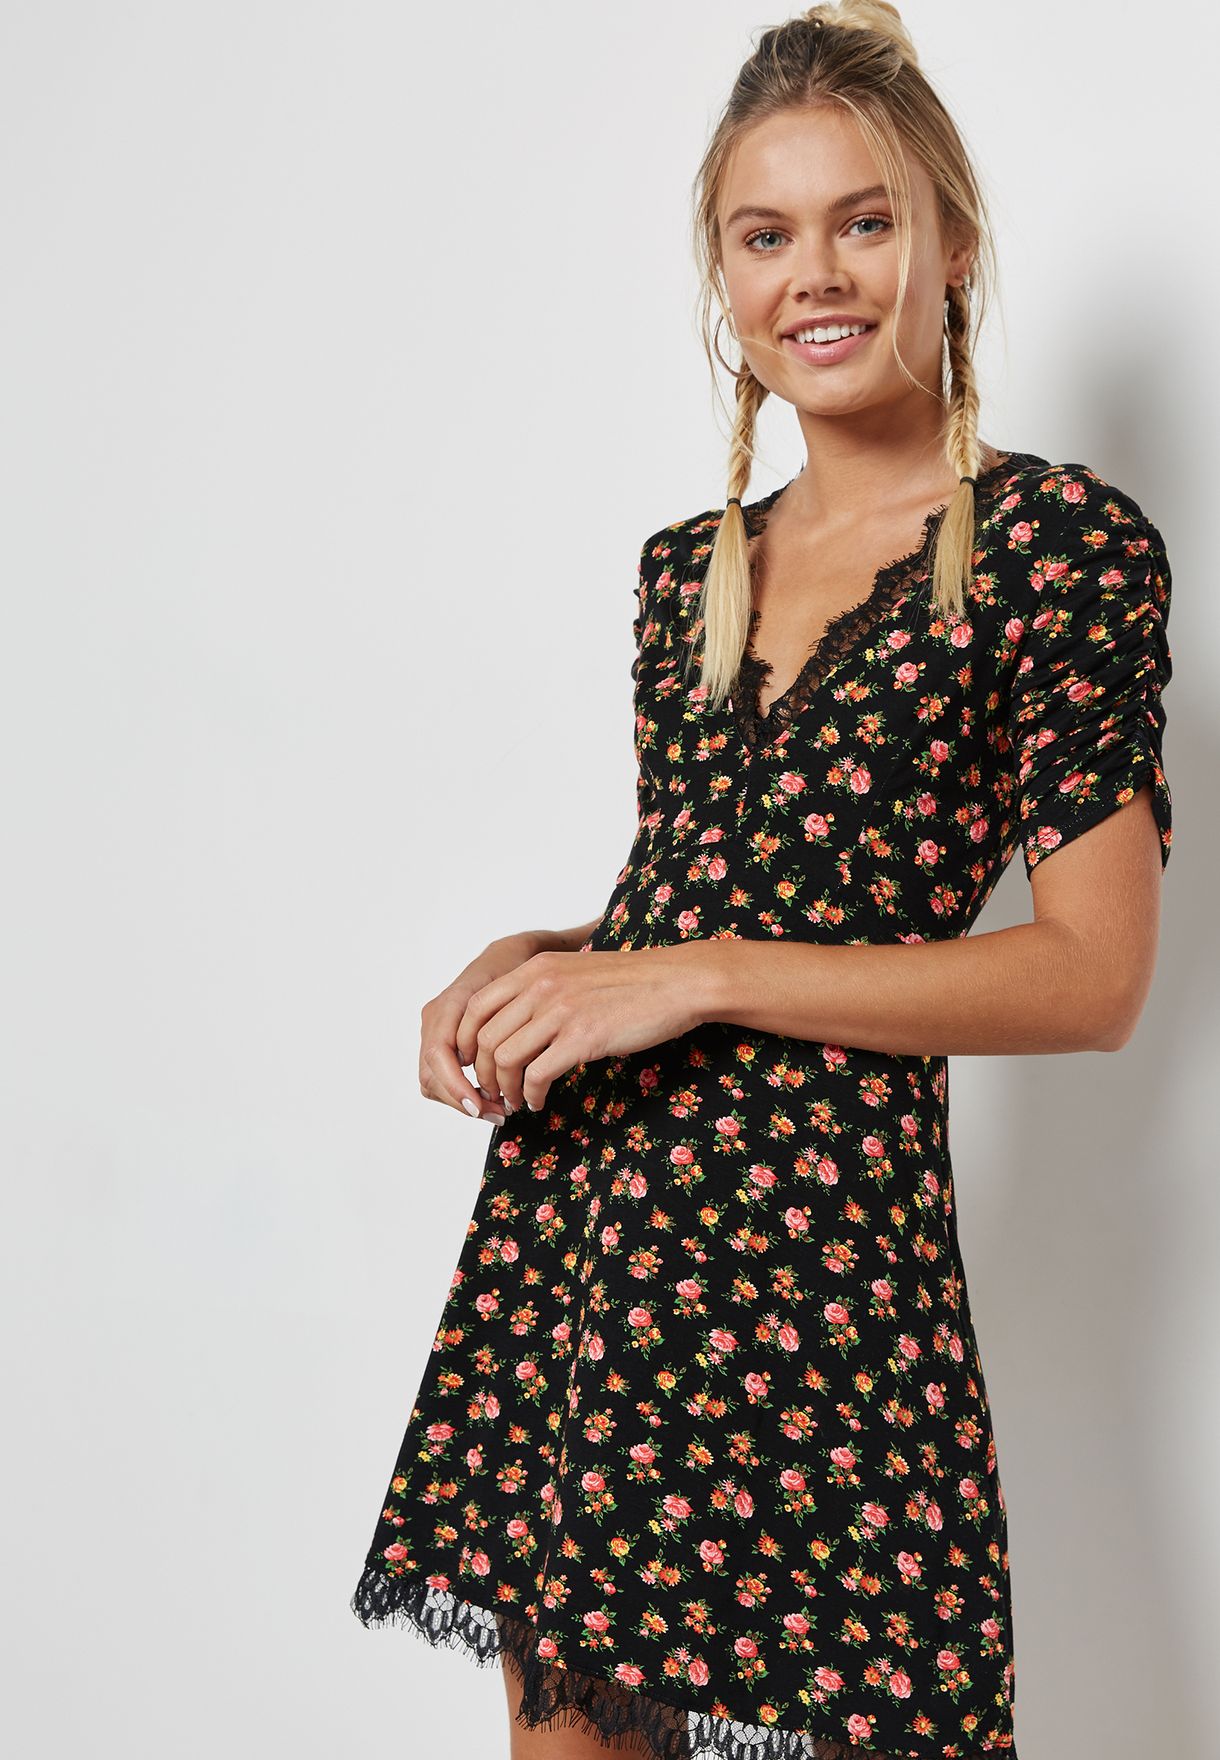 Lace Trimmed Floral Dress - agrotendencia.tv